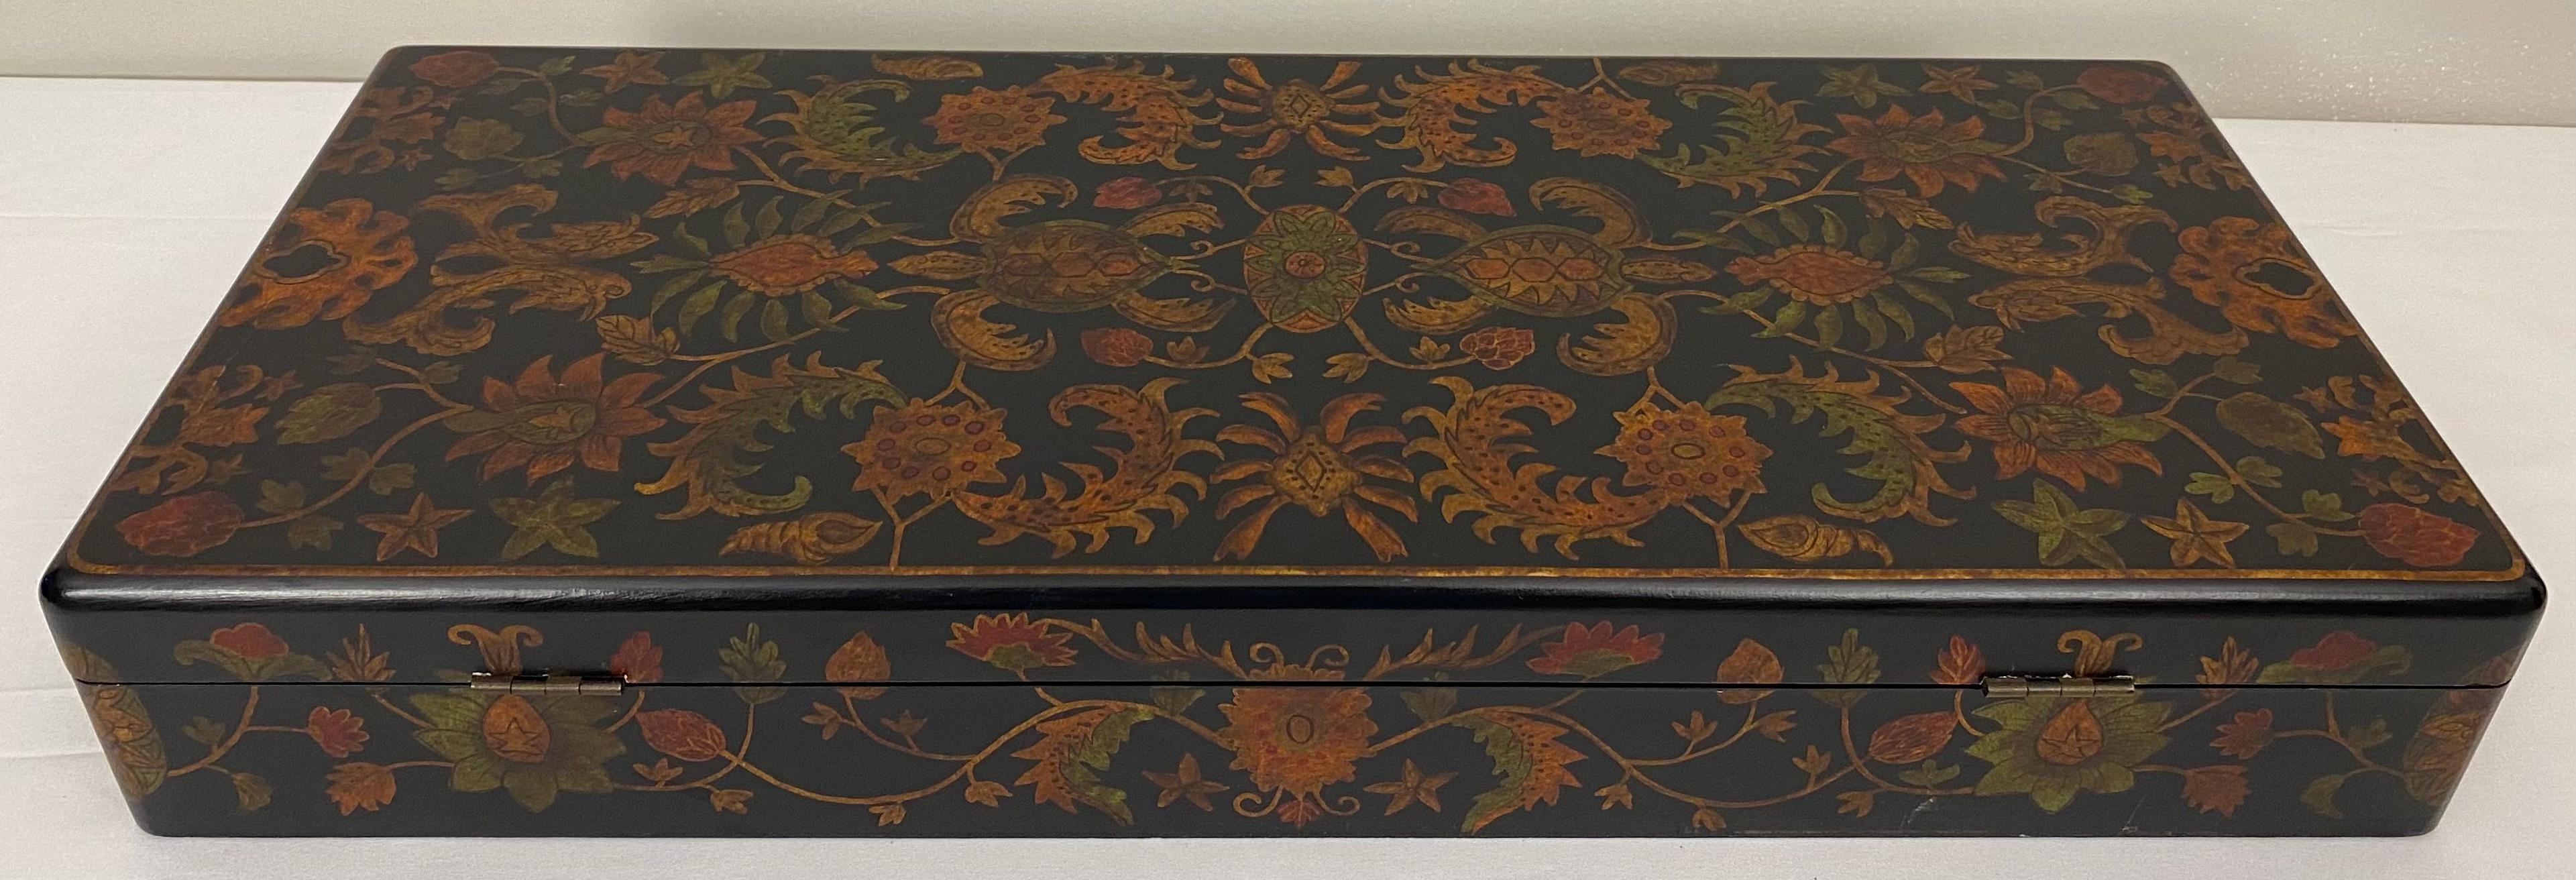 Large Hand Painted Wooden Jewelry Box For Sale 1